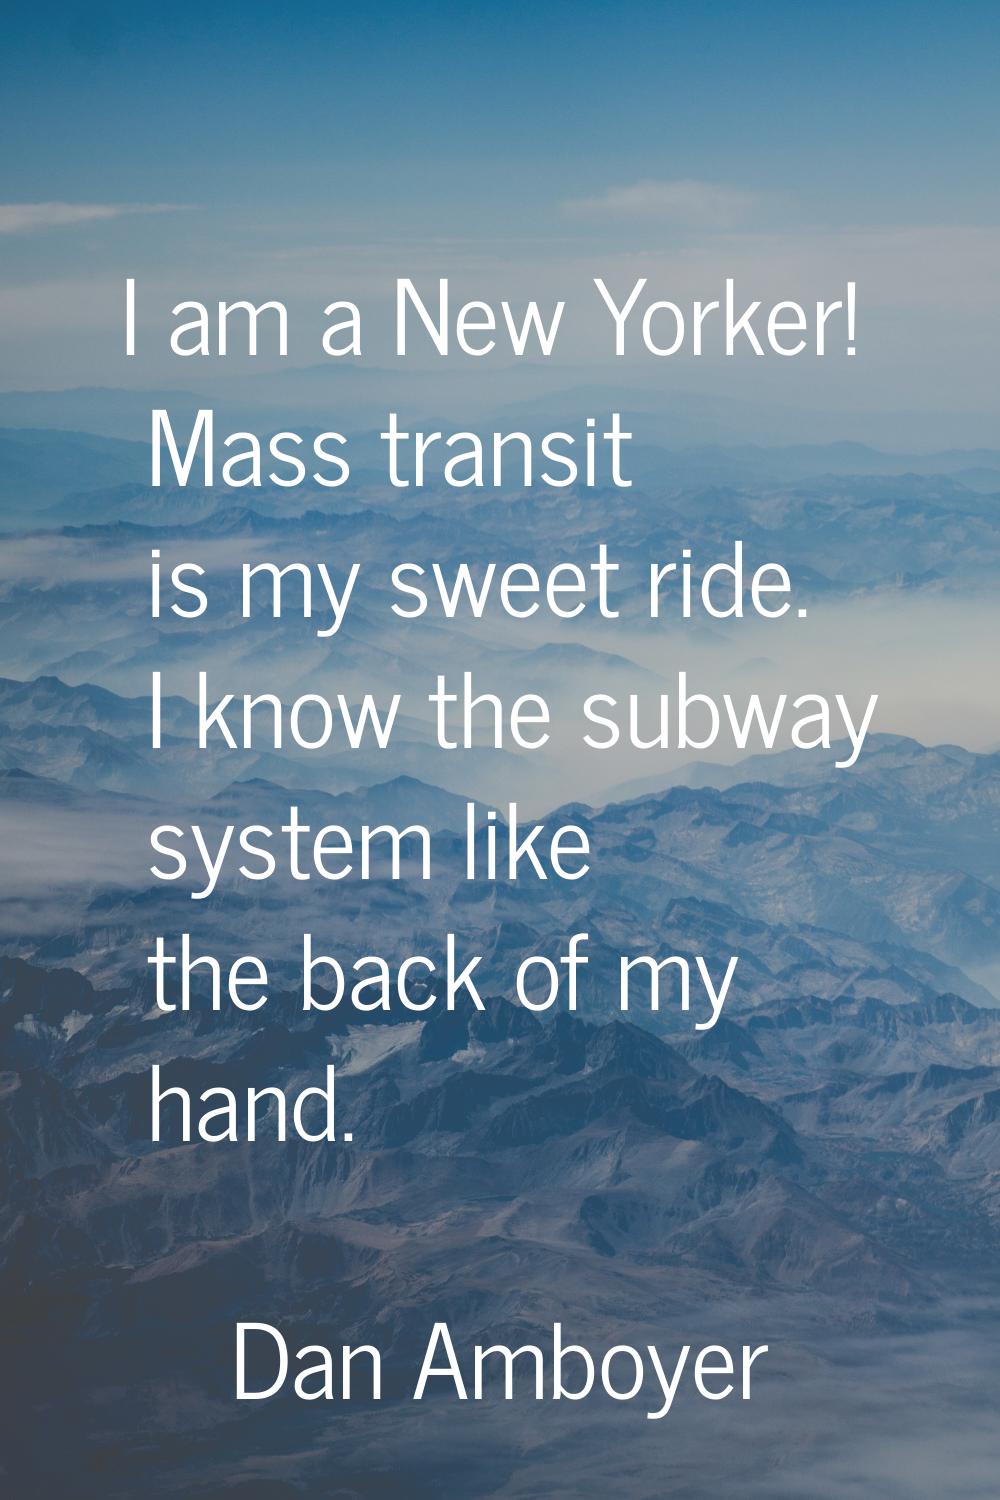 I am a New Yorker! Mass transit is my sweet ride. I know the subway system like the back of my hand